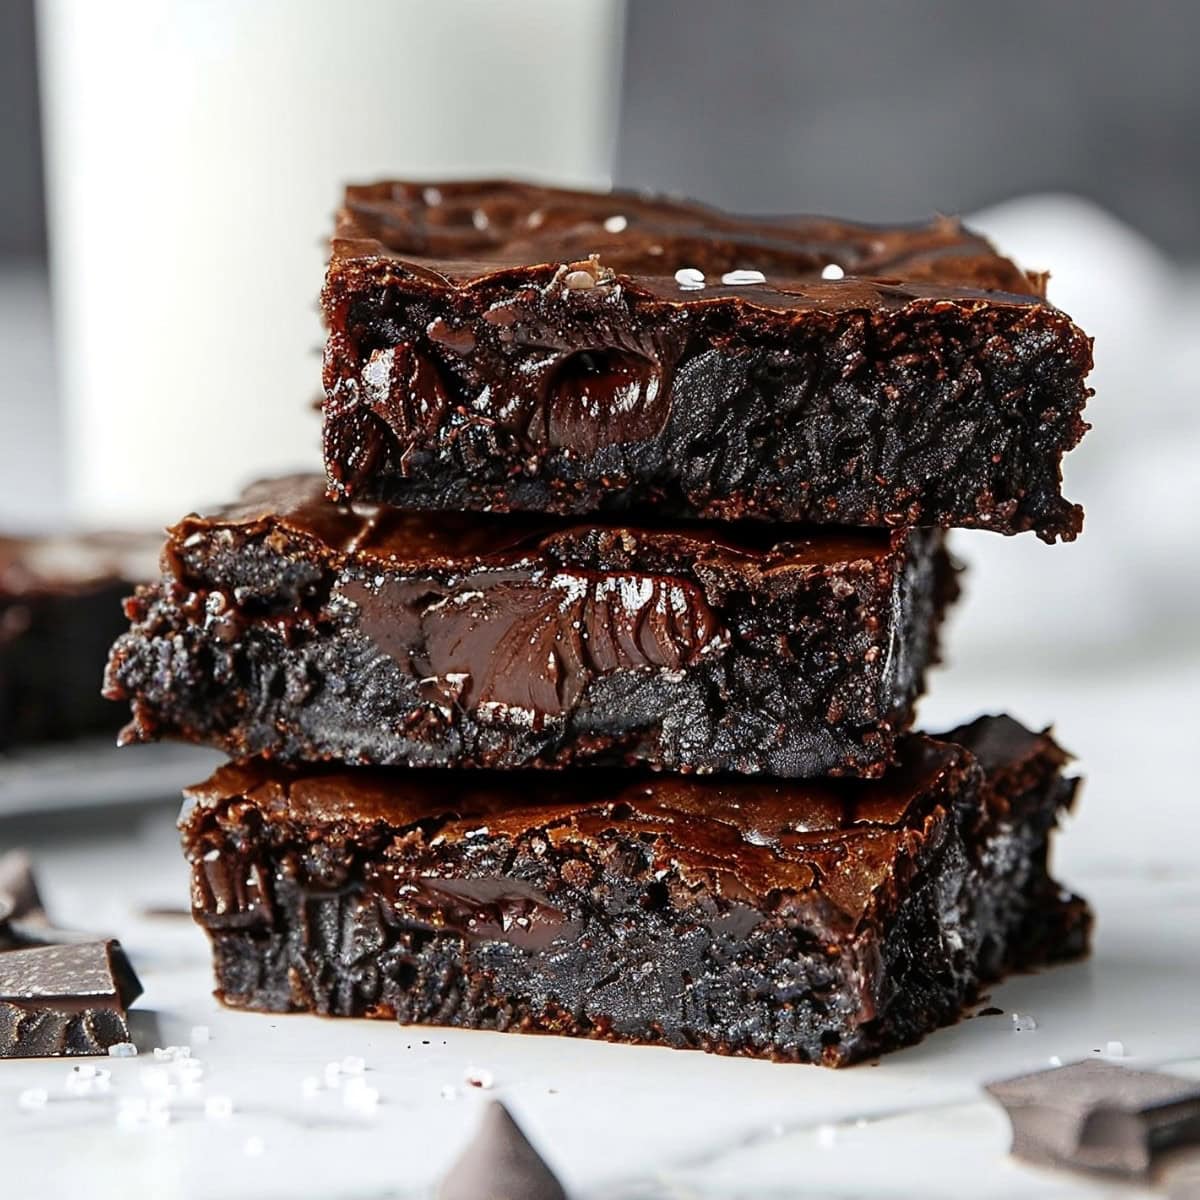 Gooey Chocolate Brownies, Stacked, on a White Marble Table with a Glass of Milk in the Background